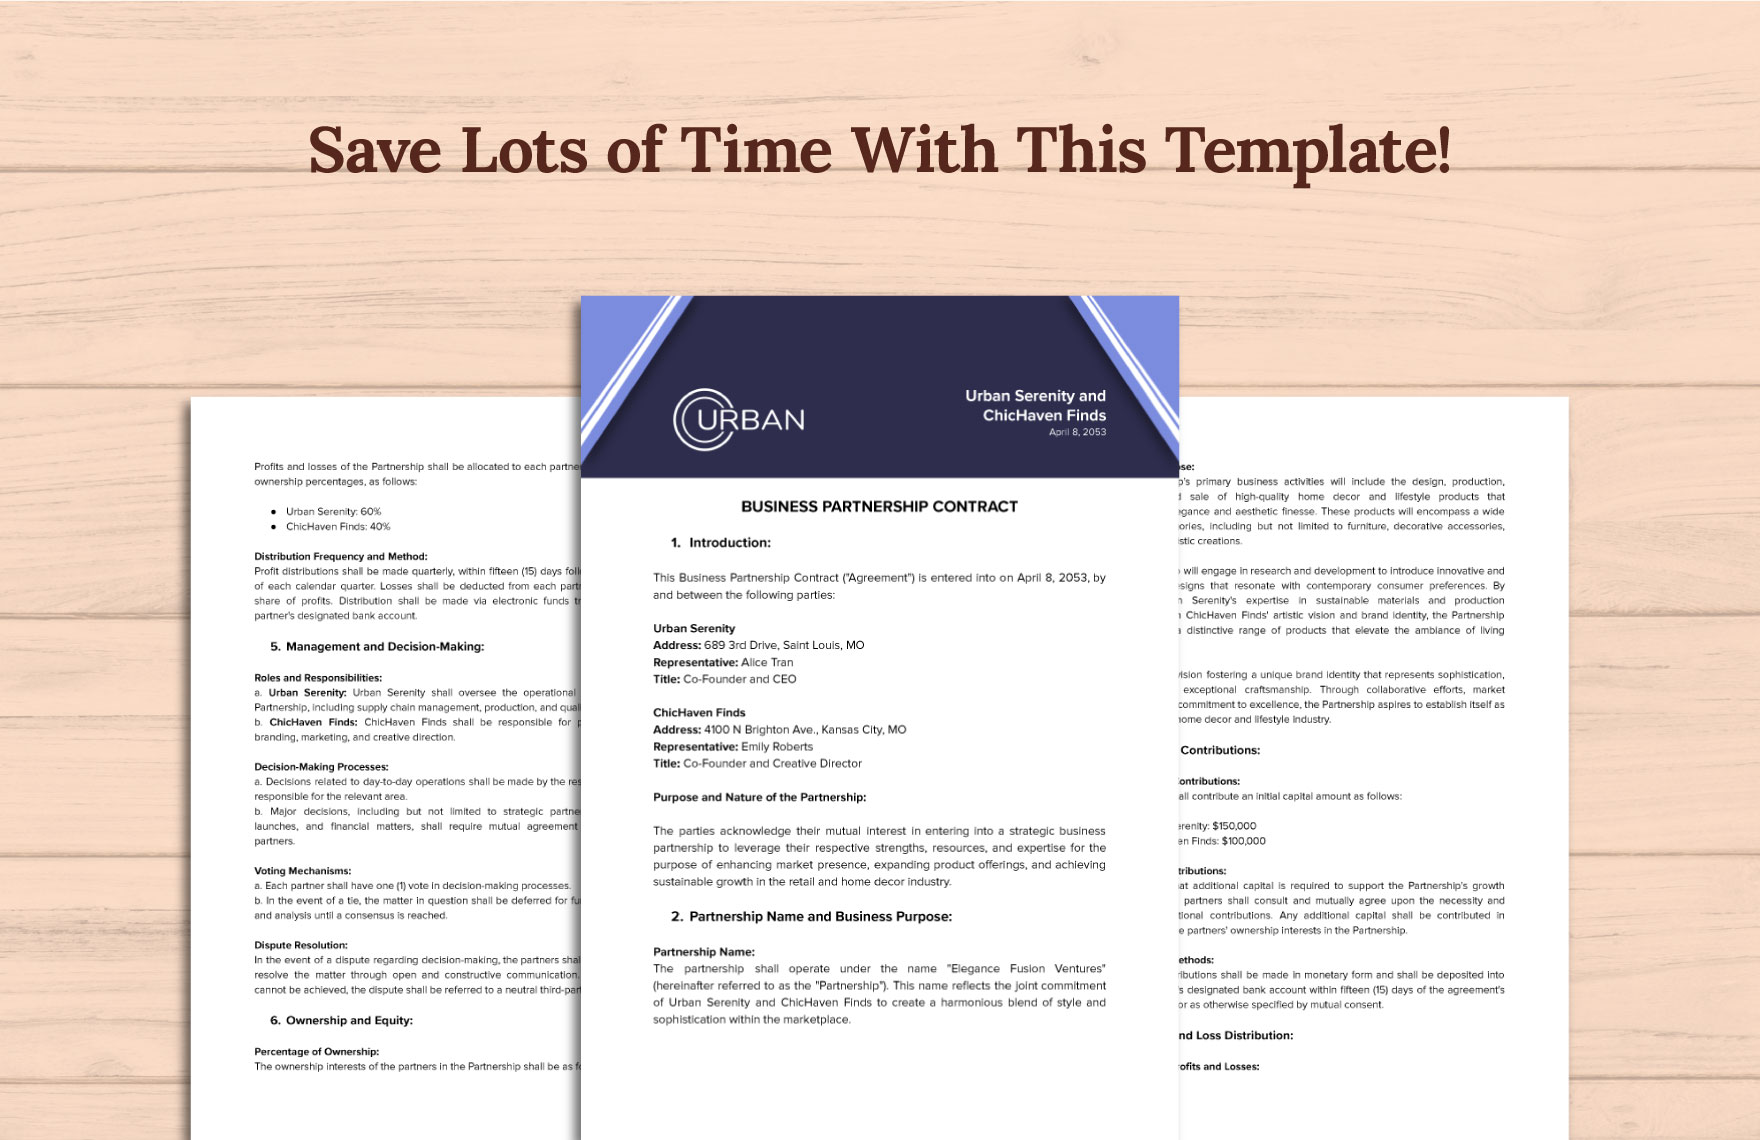 Sample Business Partnership Contract Template